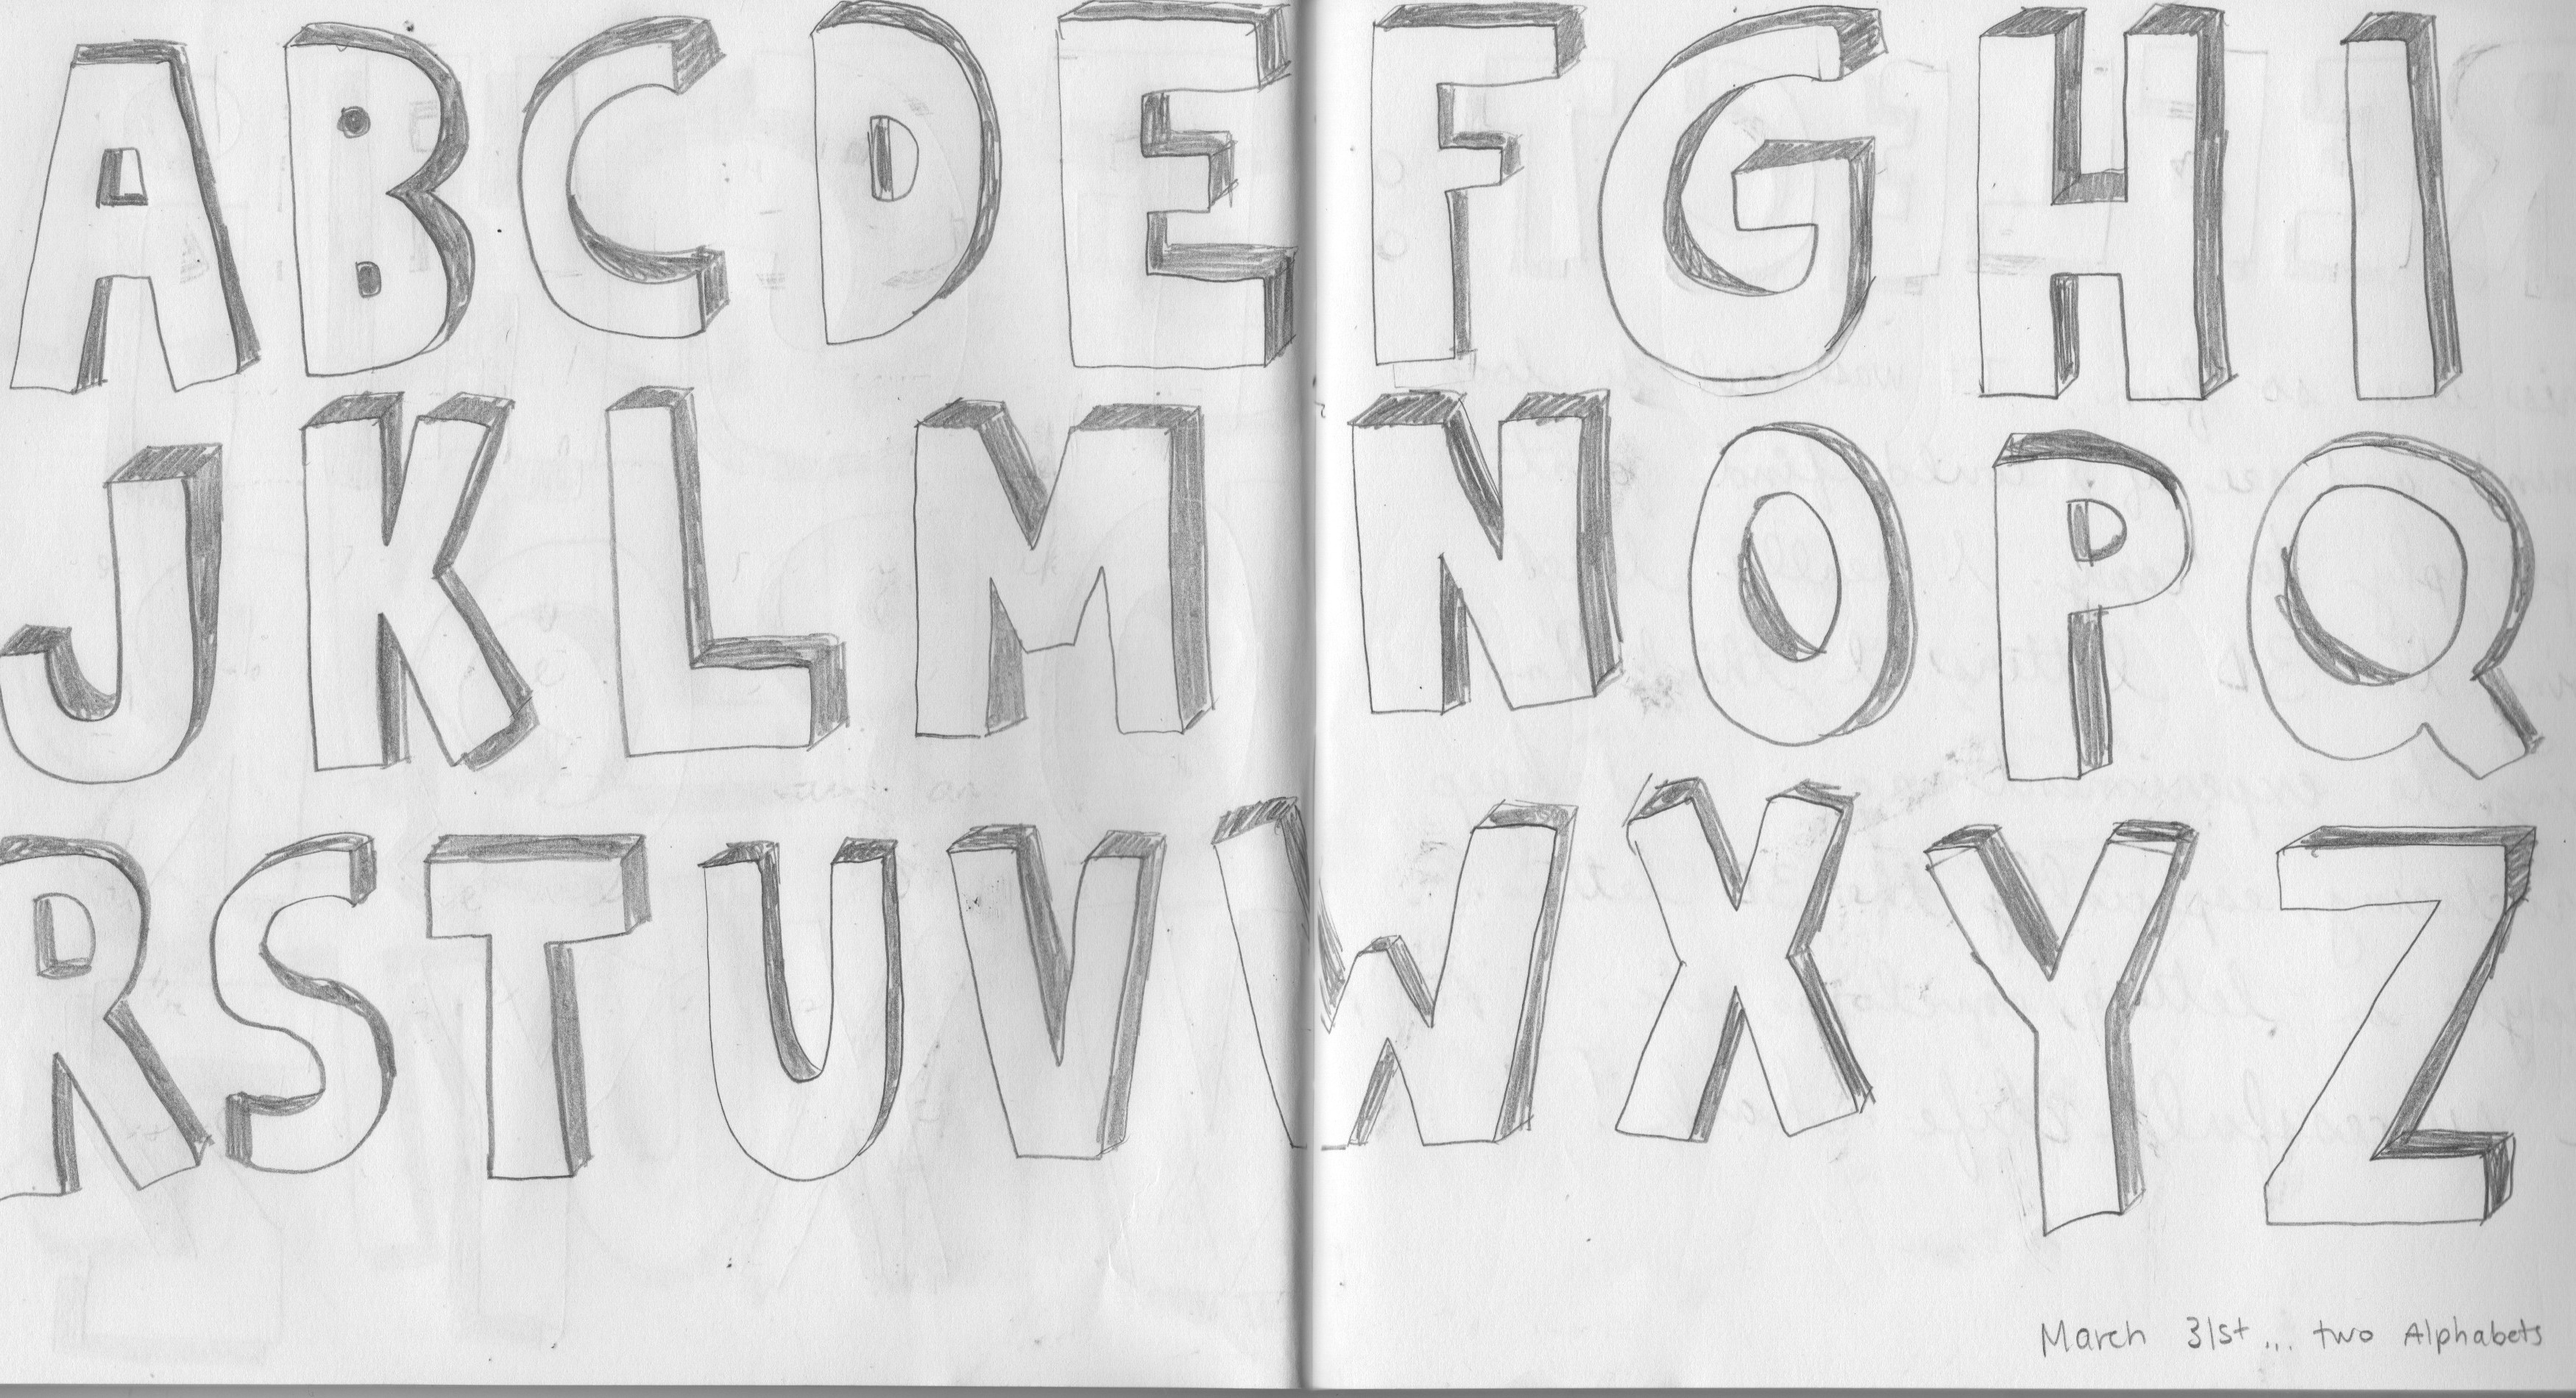 I did TWO alphabets in 3D!